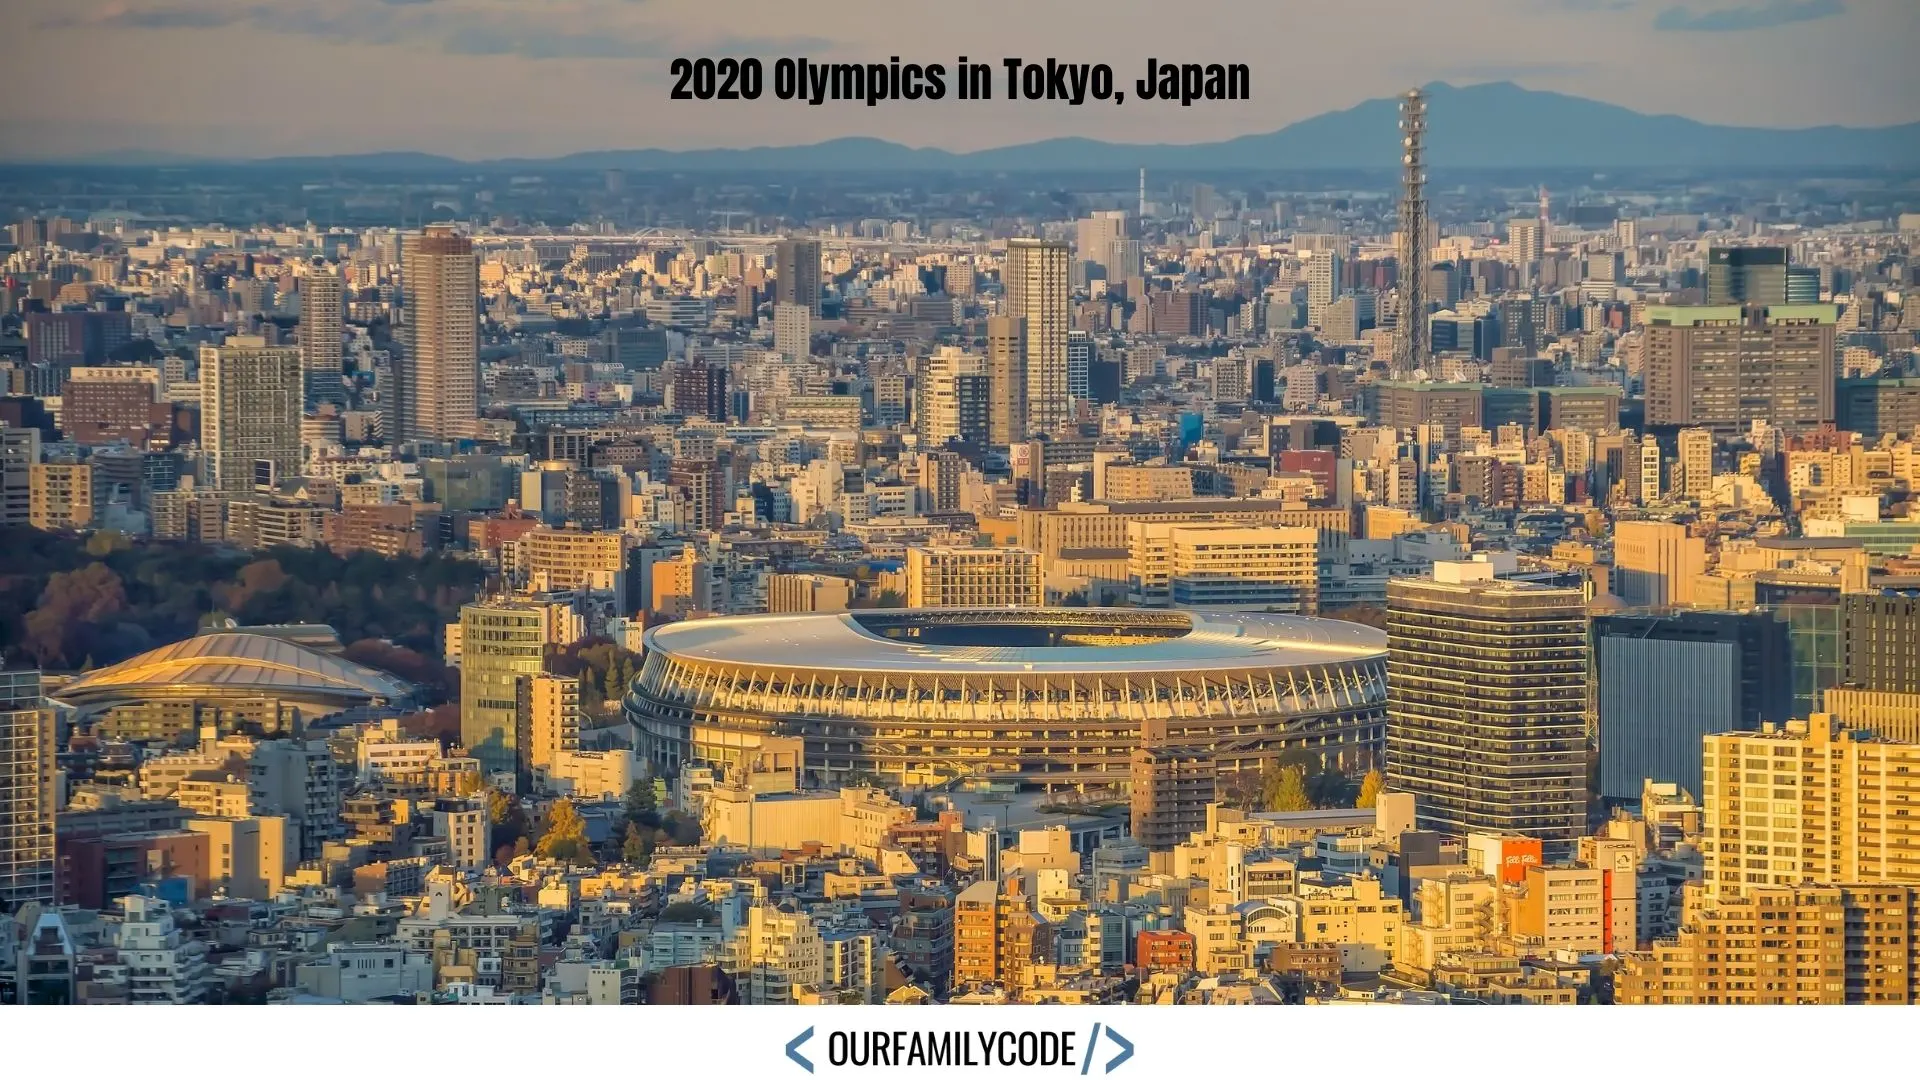 A picture of the Olympic Stadium for the 2020 Summer Olympic Games in Tokyo, Japan.